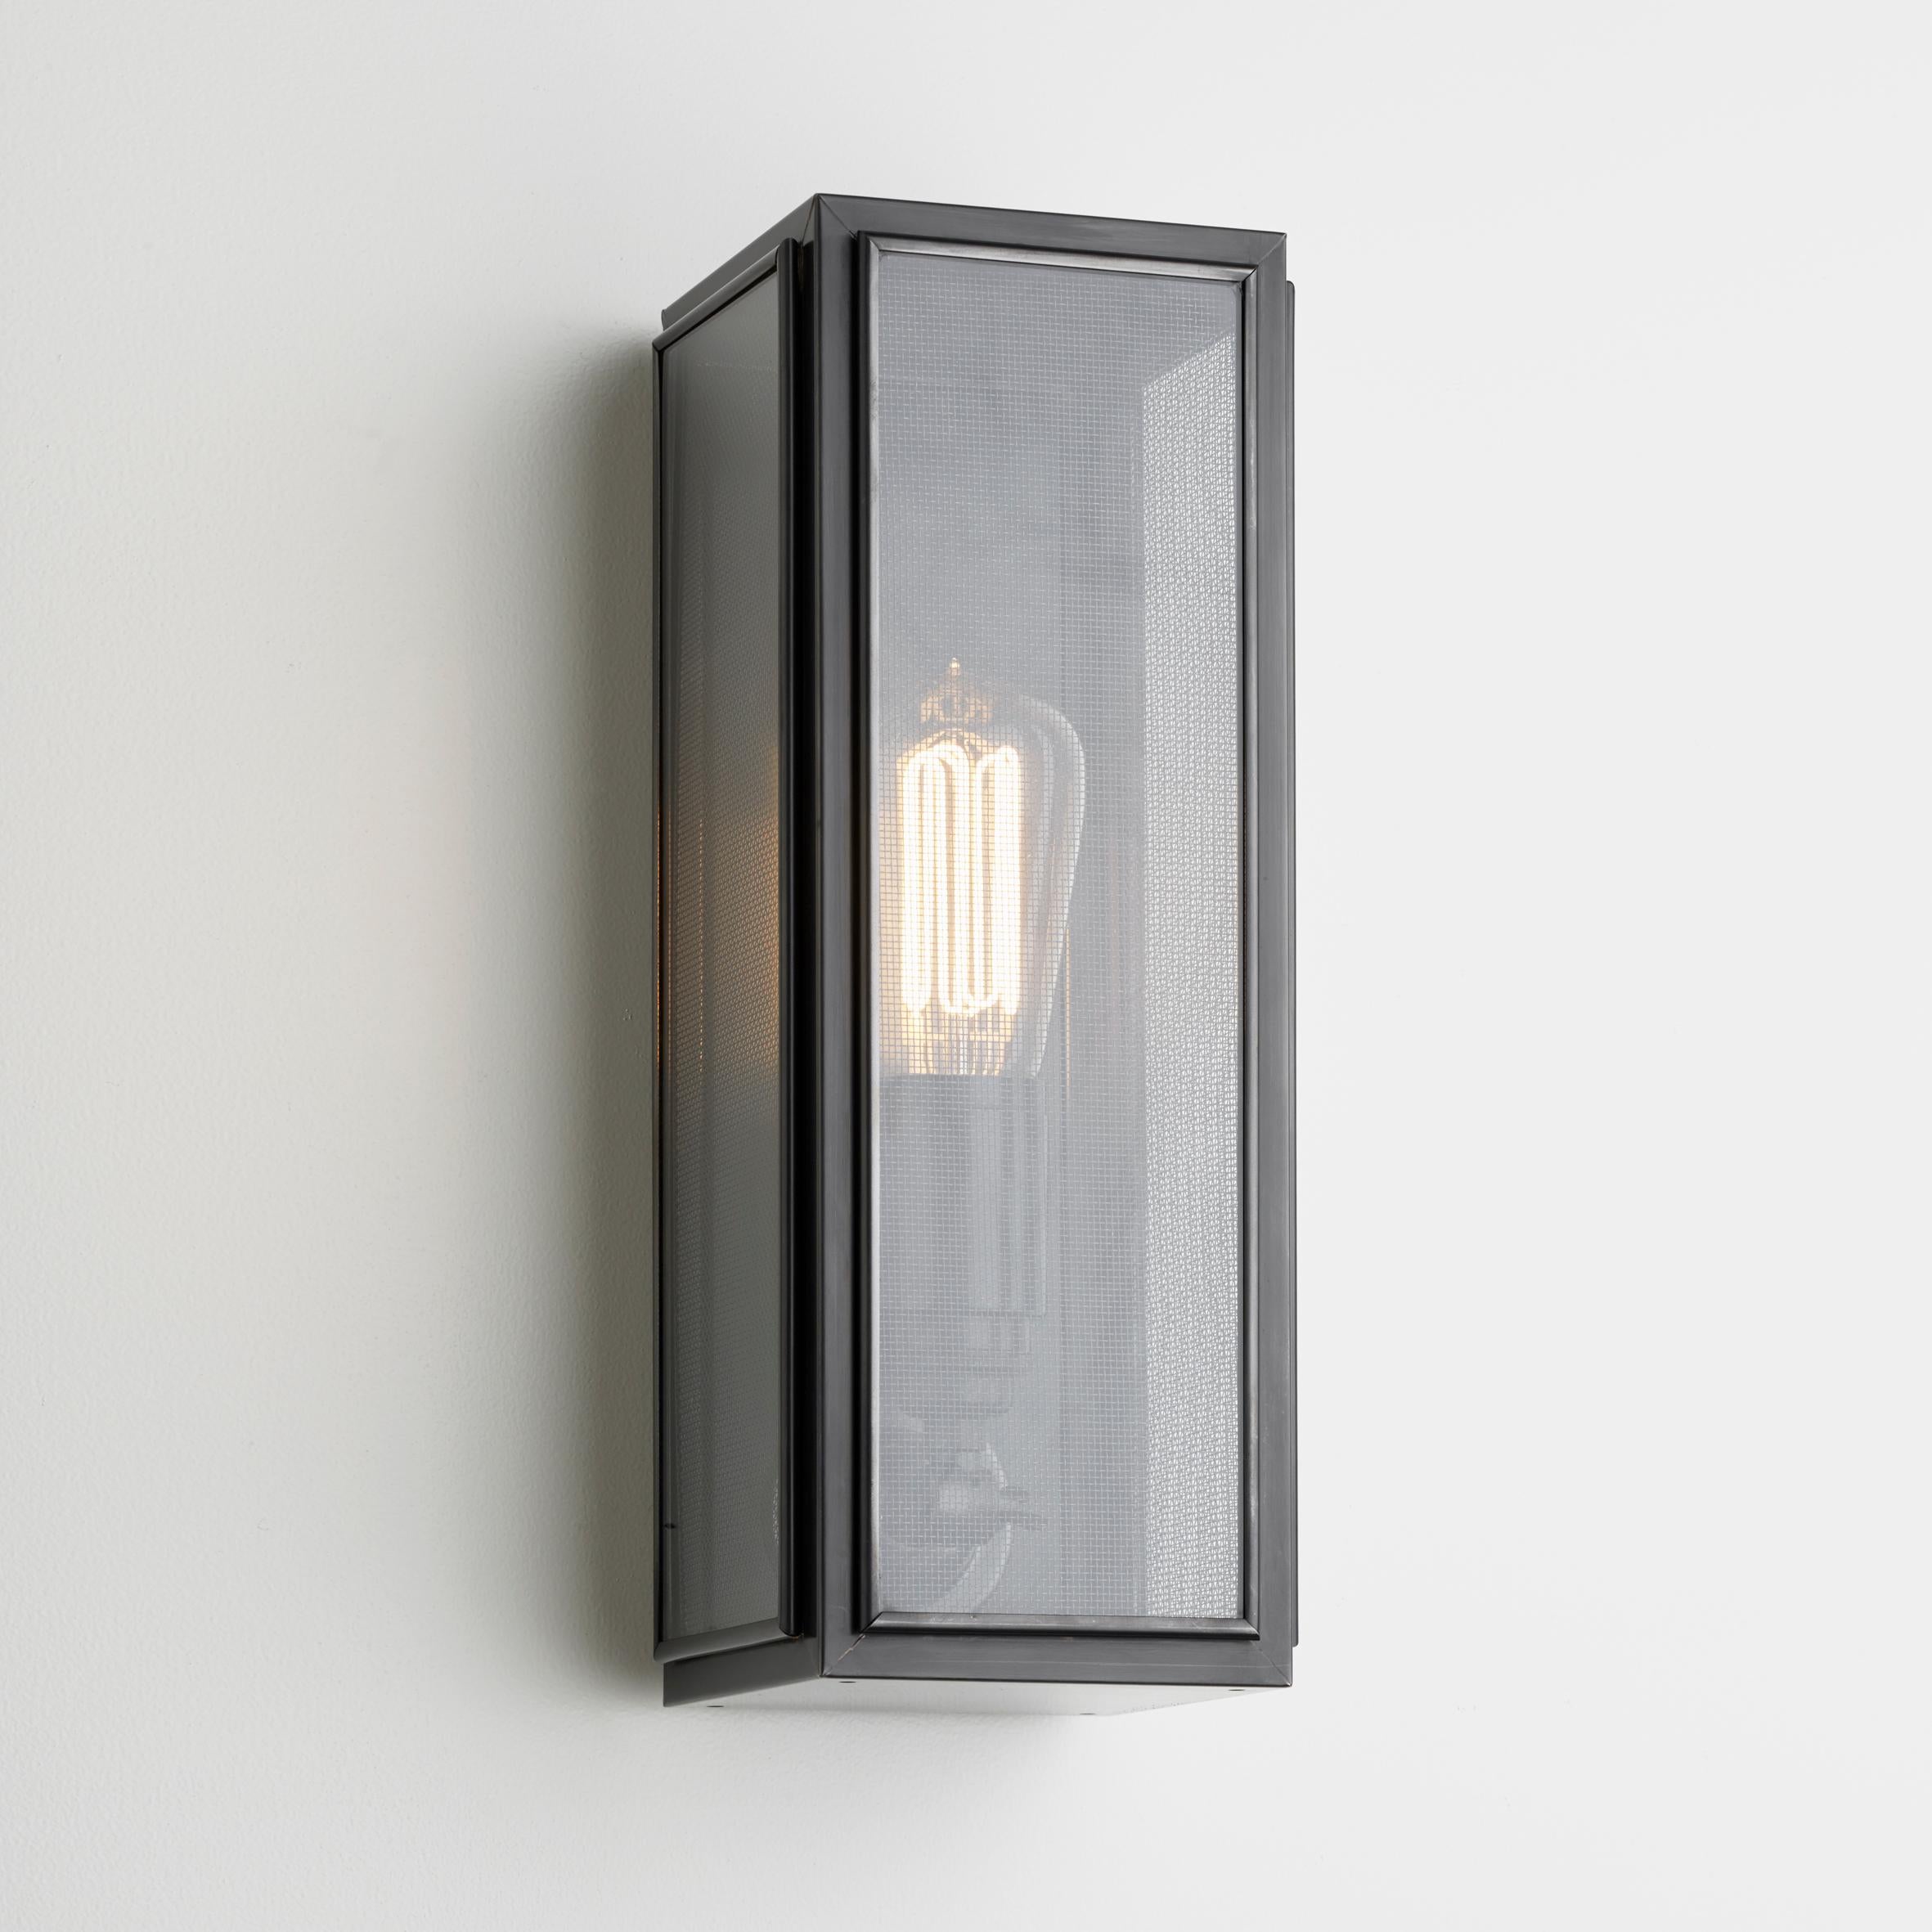 Wall light in brass with outside fitted clear glass. Spring closure. Gauze: (removable) woven metal gauze at the inside of the light fitting. For indoor and outdoor use (IP44).

Caret squirrel cage lamp 230V E27 7.7W 2300K. Main power 230V 50Hz.